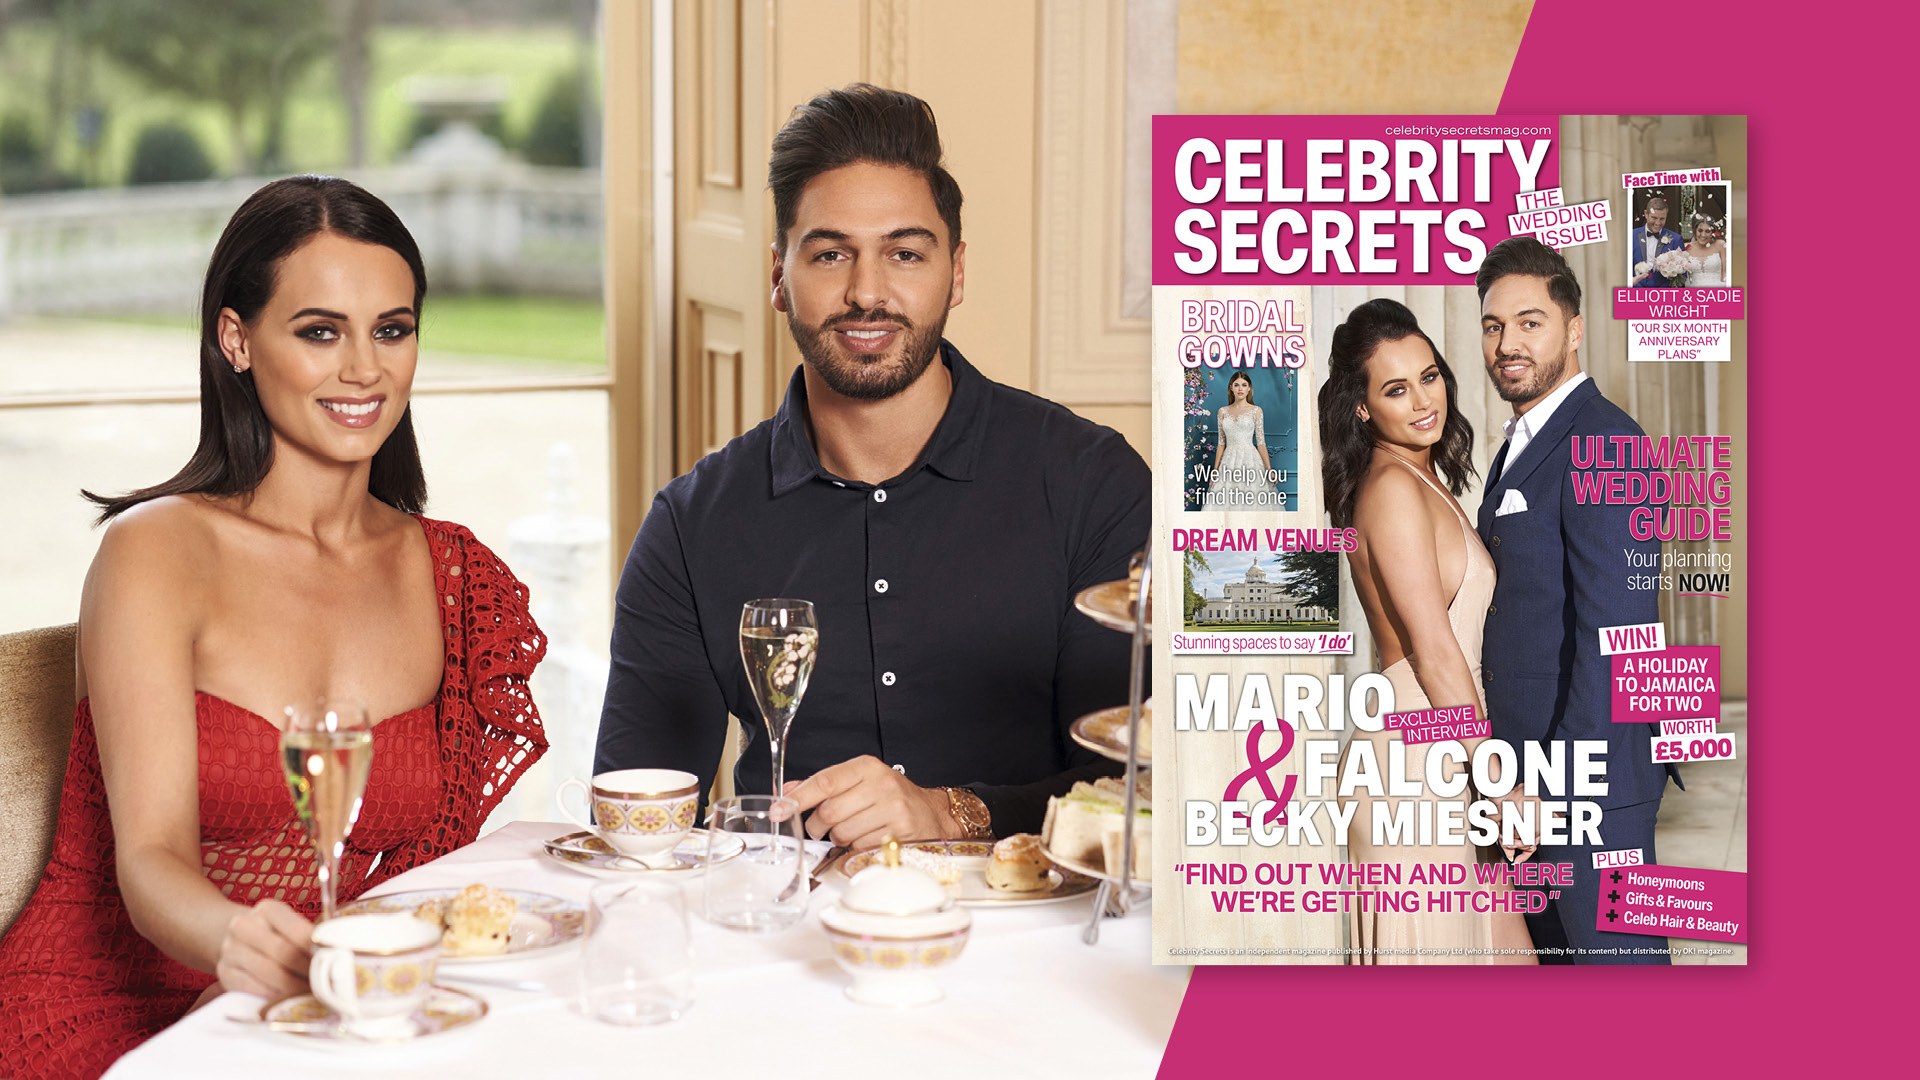 Exclusive interview with TOWIE’s Mario Falcone and Becky Miesner inside the weddings issue of Celebrity Secrets – OUT NOW!